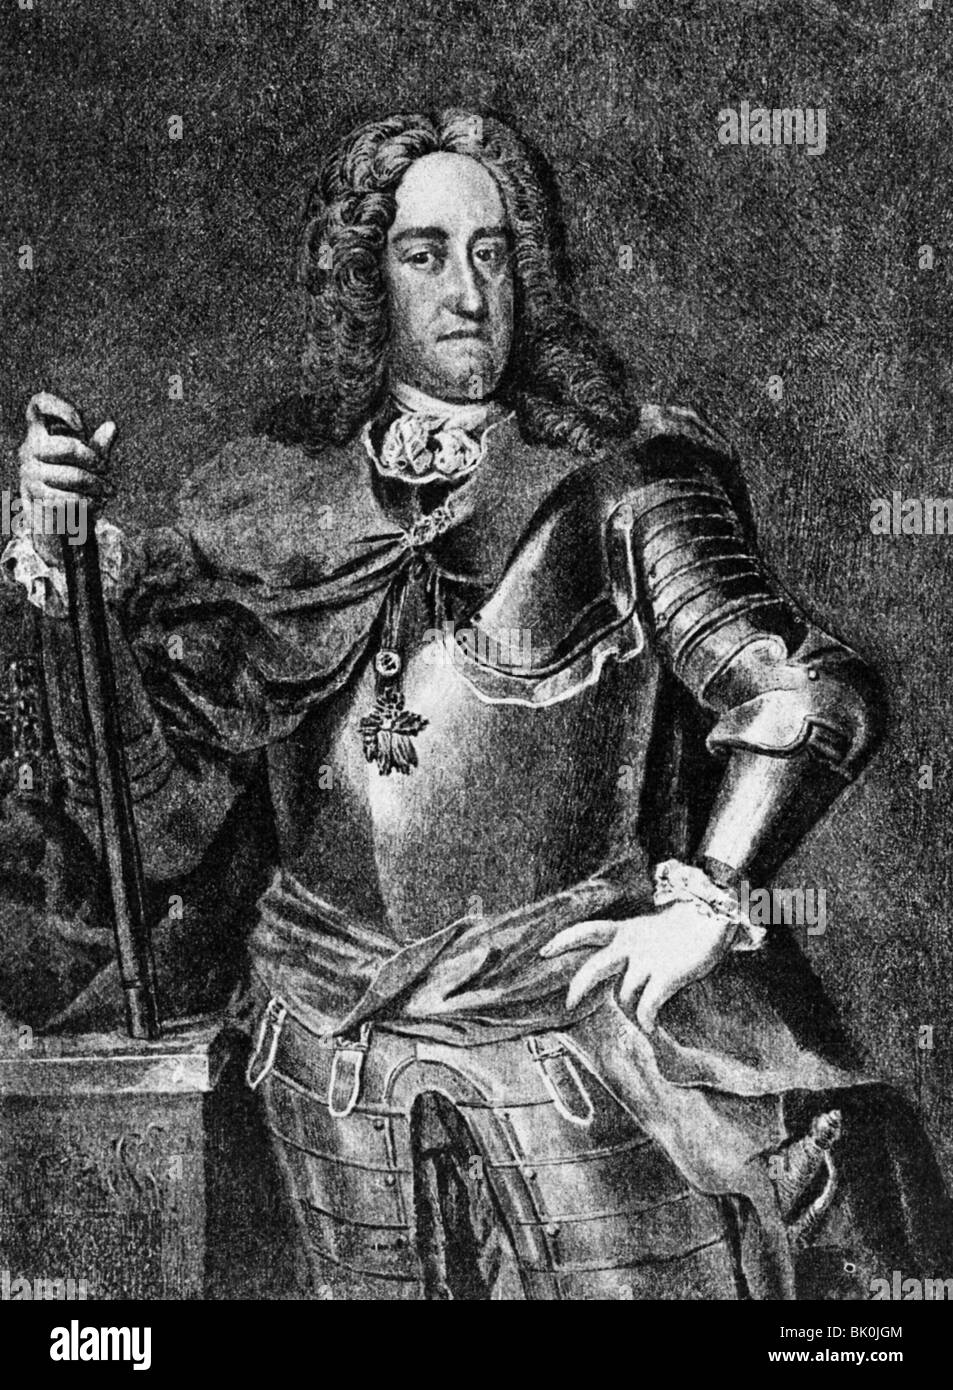 Charles VI, 1.10.1685 - 20.10.1740, Holy Roman Emperor 12.10.1711 - 20.10.1740, half length, copper engraving after painting by Martin van Meytens, 18th century, , Artist's Copyright has not to be cleared Stock Photo